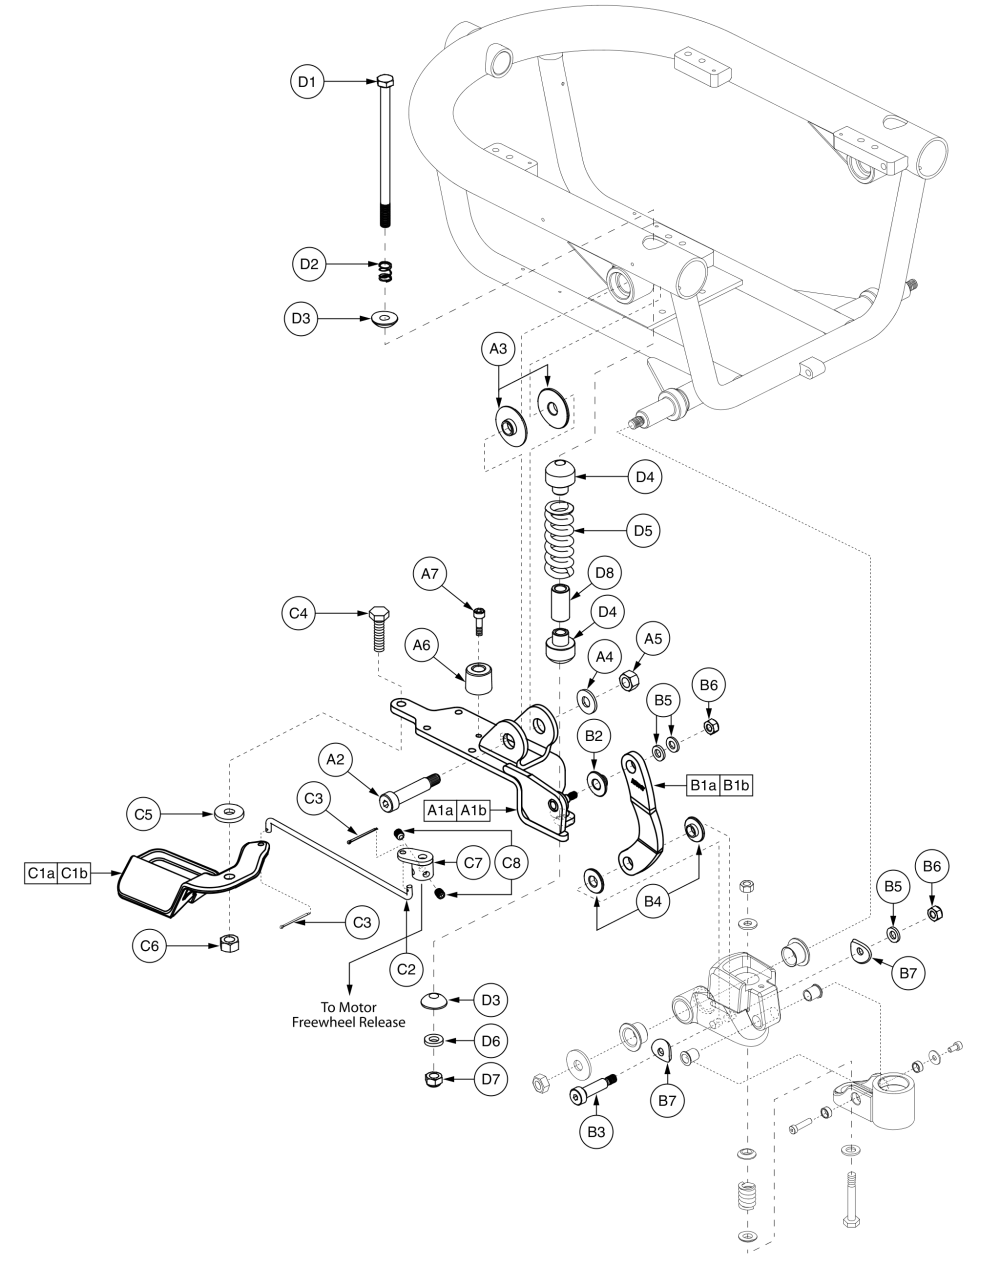 Active Trac, Motor Mount, Freewheel Lever, & Caster Arm Assembly, Jazzy 610 parts diagram